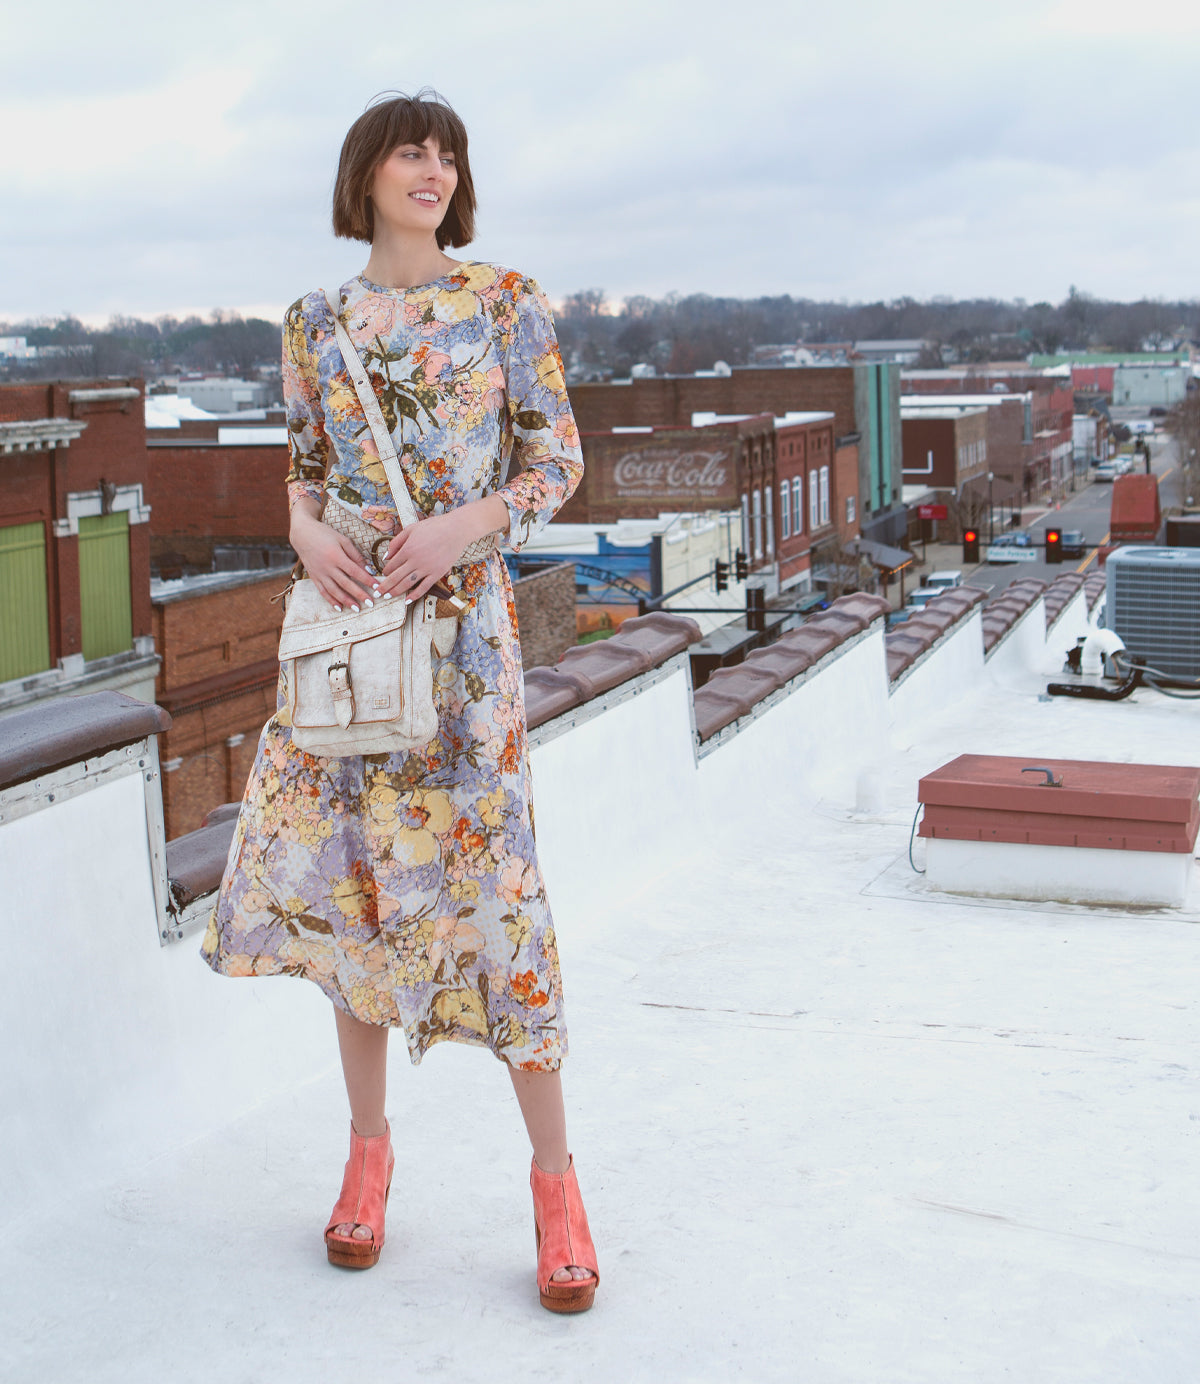 A woman in a floral dress and orange heels stands on a rooftop, holding a Bed Stu Ainhoa LTC crossbody handbag, with a small town backdrop under a cloudy sky.